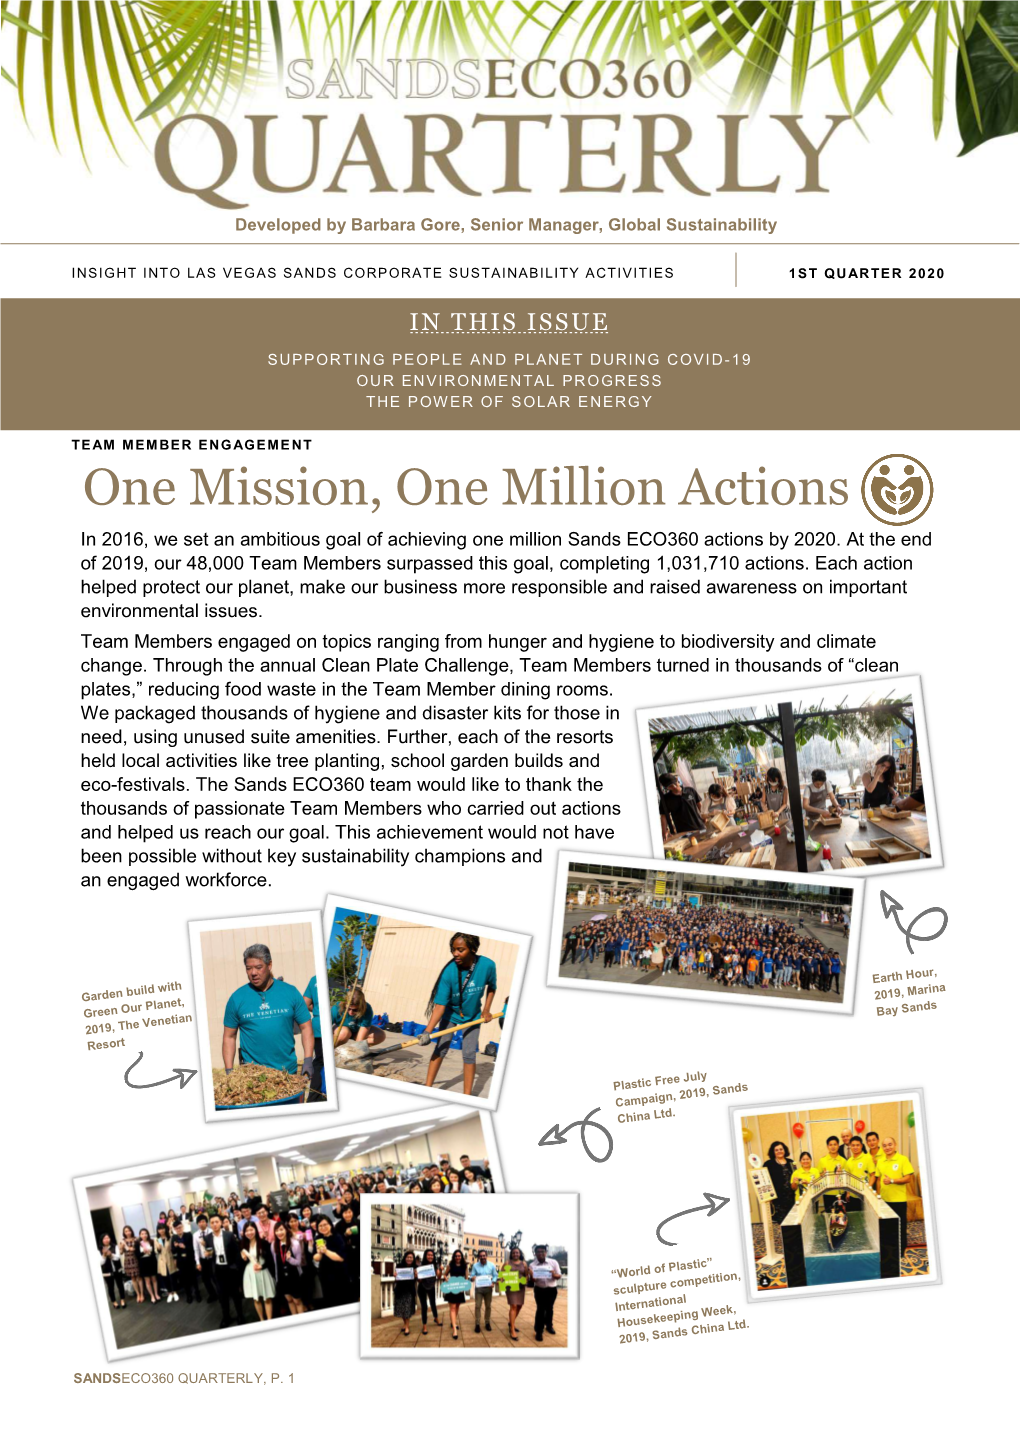 One Mission, One Million Actions in 2016, We Set an Ambitious Goal of Achieving One Million Sands ECO360 Actions by 2020